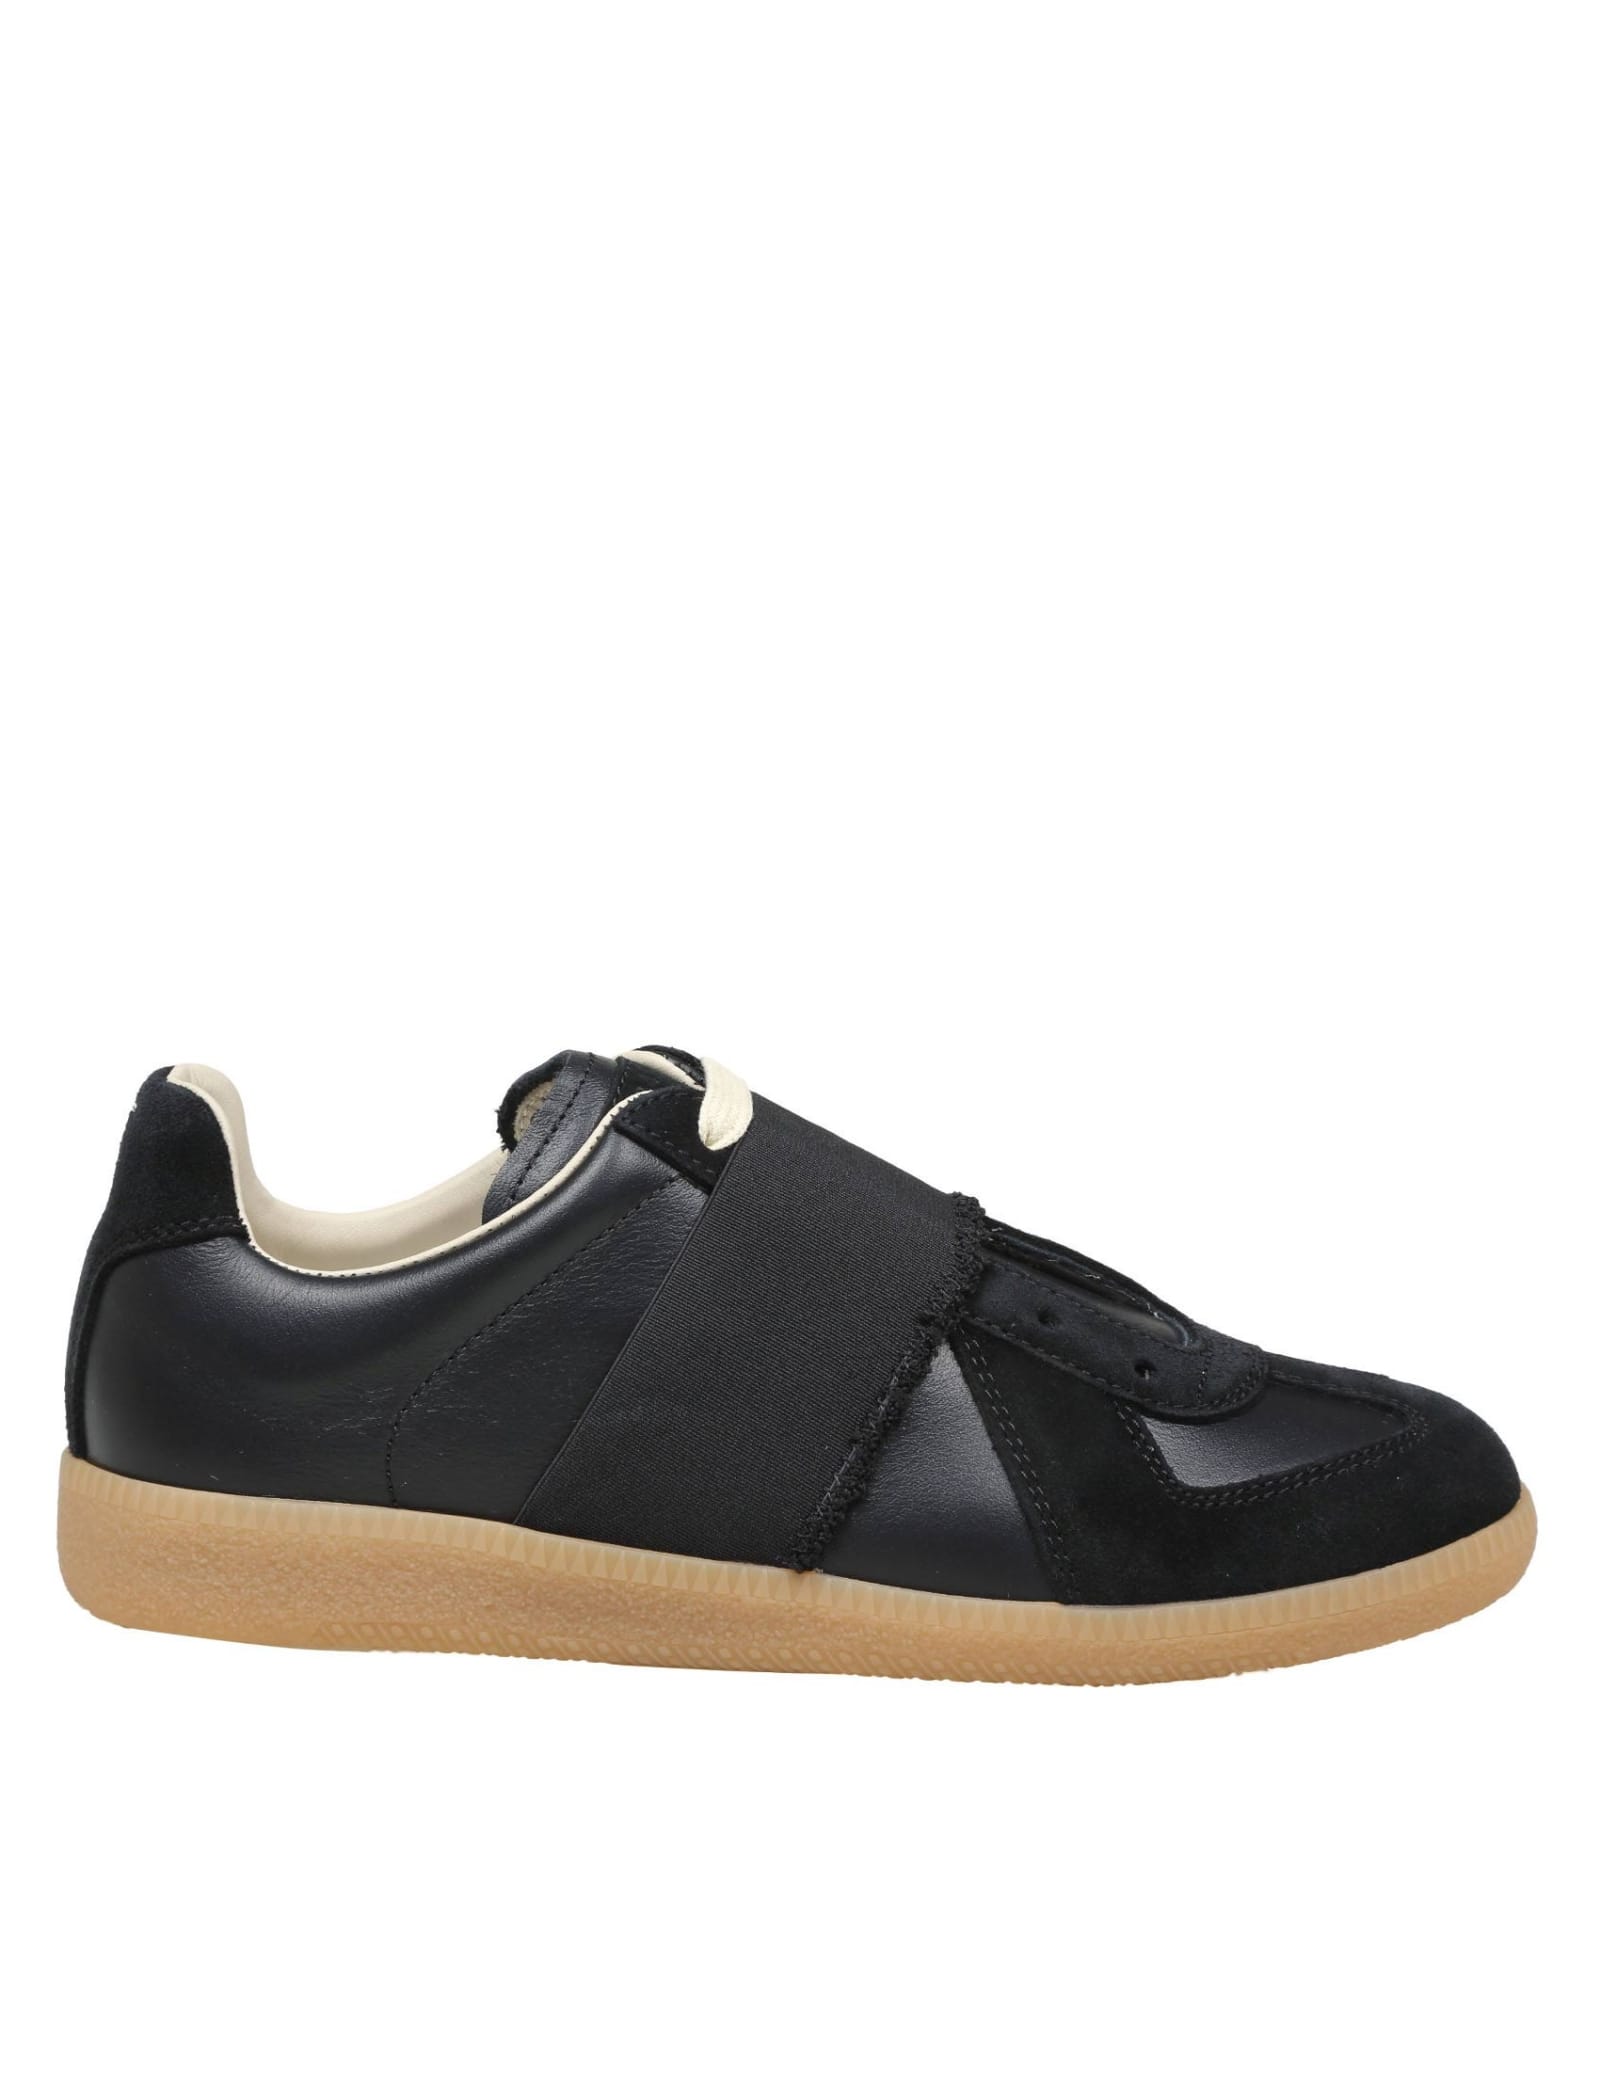 MAISON MARGIELA REPLICA SNEAKERS WITH ELASTIC BAND